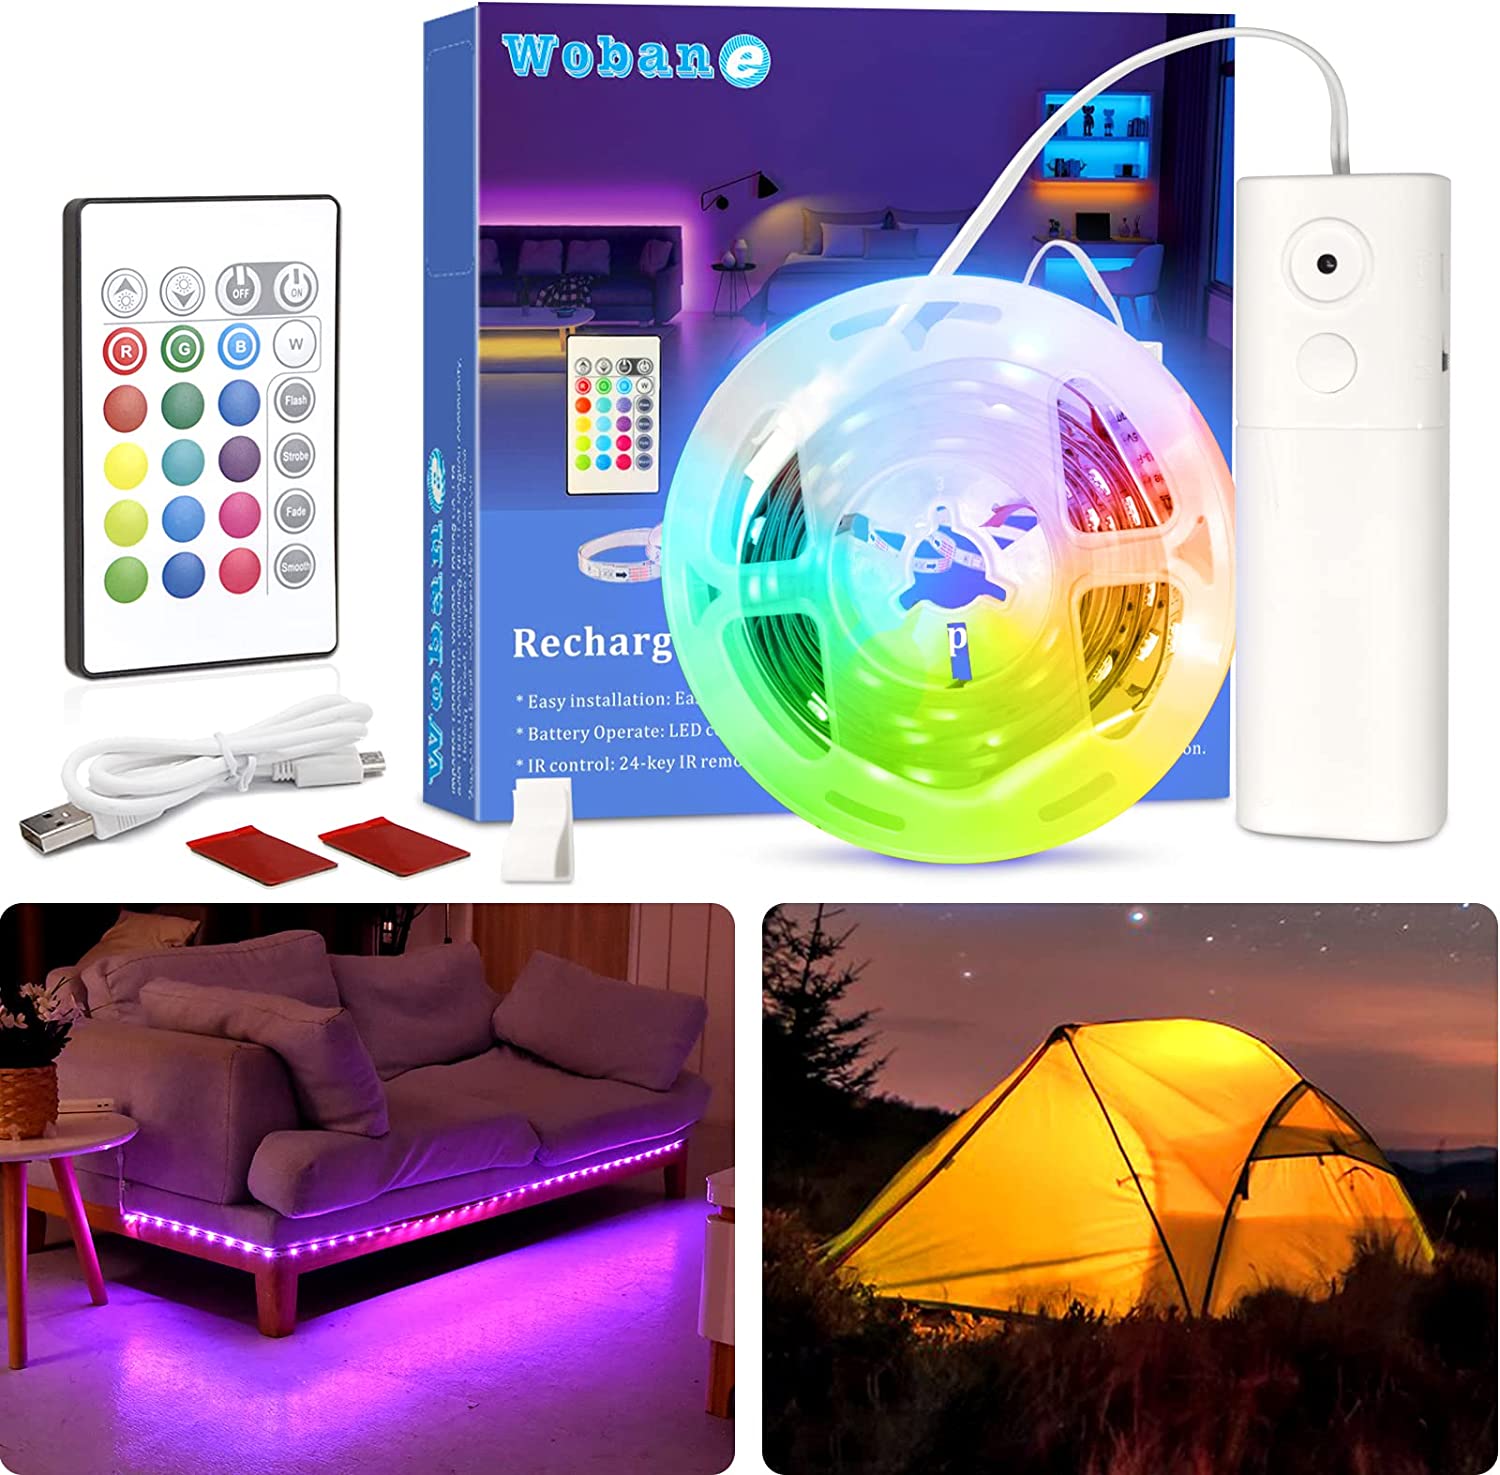 WOBANE Rechargeable LED Strip Light, 2000mAH Battery Powered Color Changing Strip Light, 6.56ft RGB Rope Light with Remote, Colorful Light for Party,Shelf,Sofa,Desk,Game,Holiday,Indoor Decoration